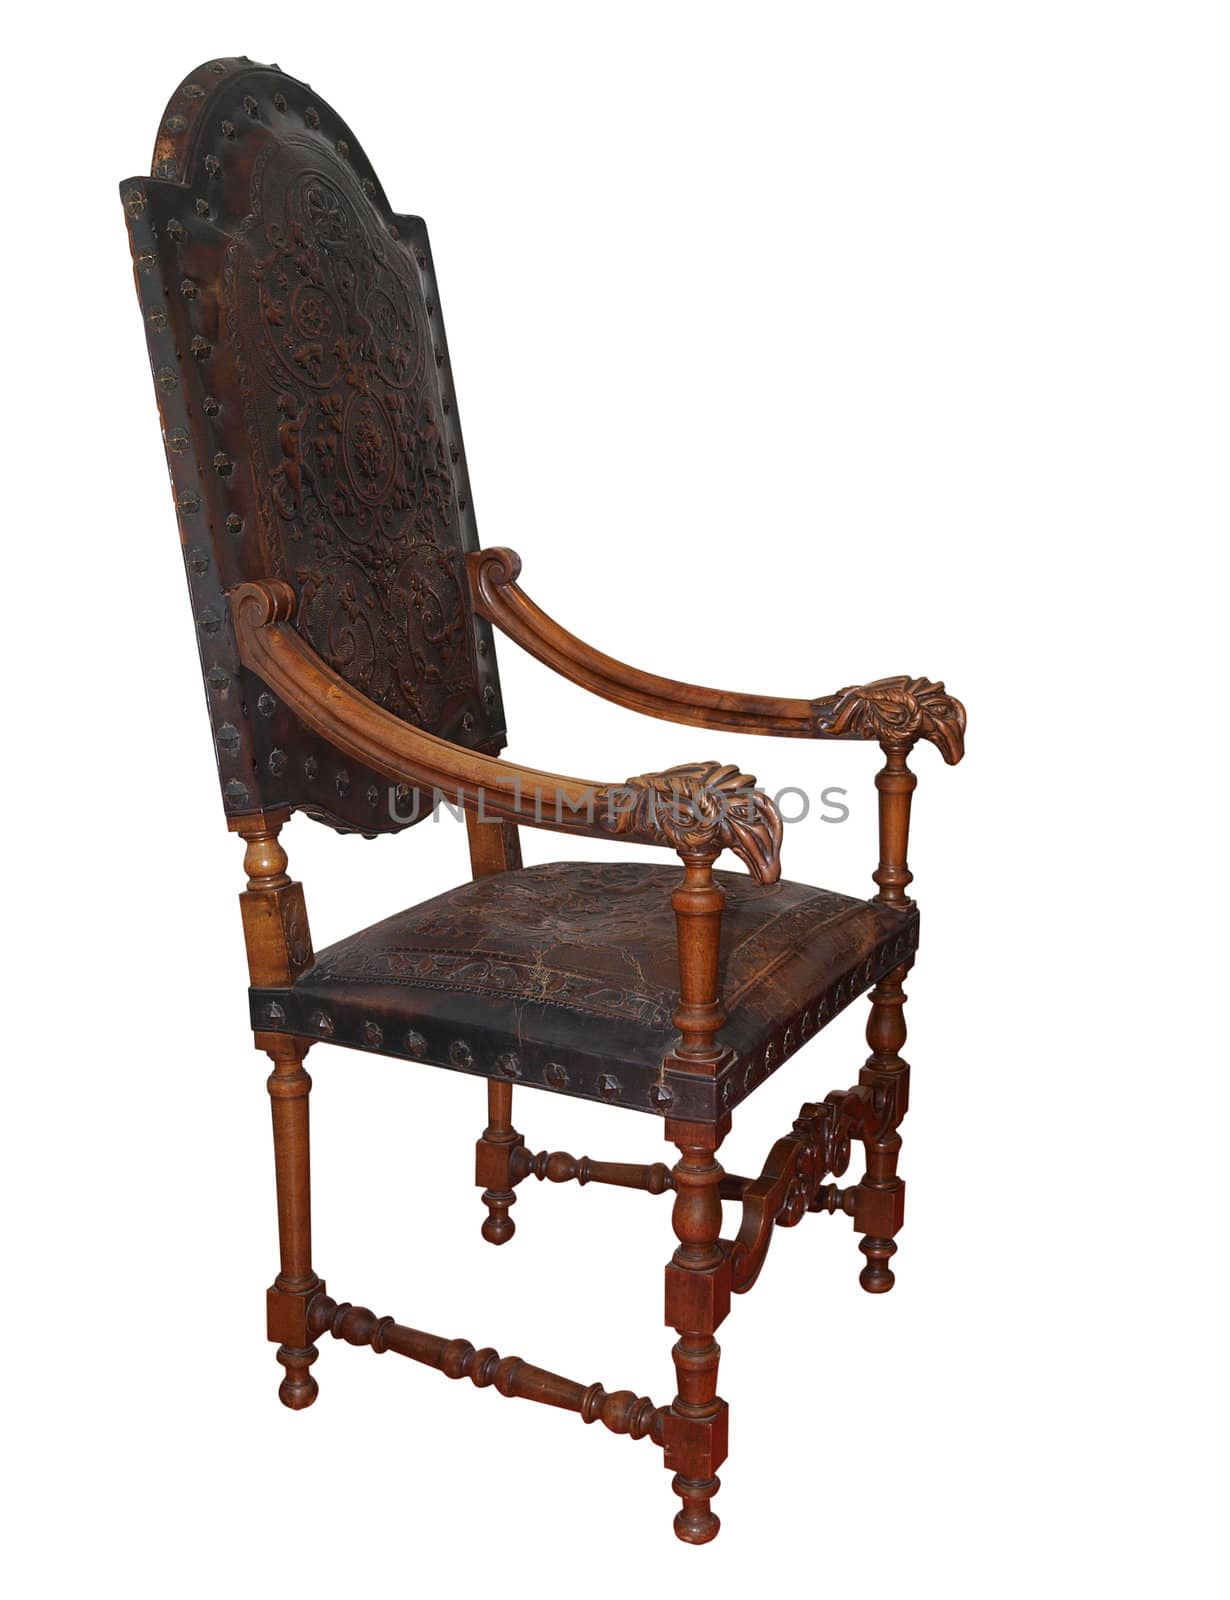 Ornate Antique Leather Chair  by MargoJH